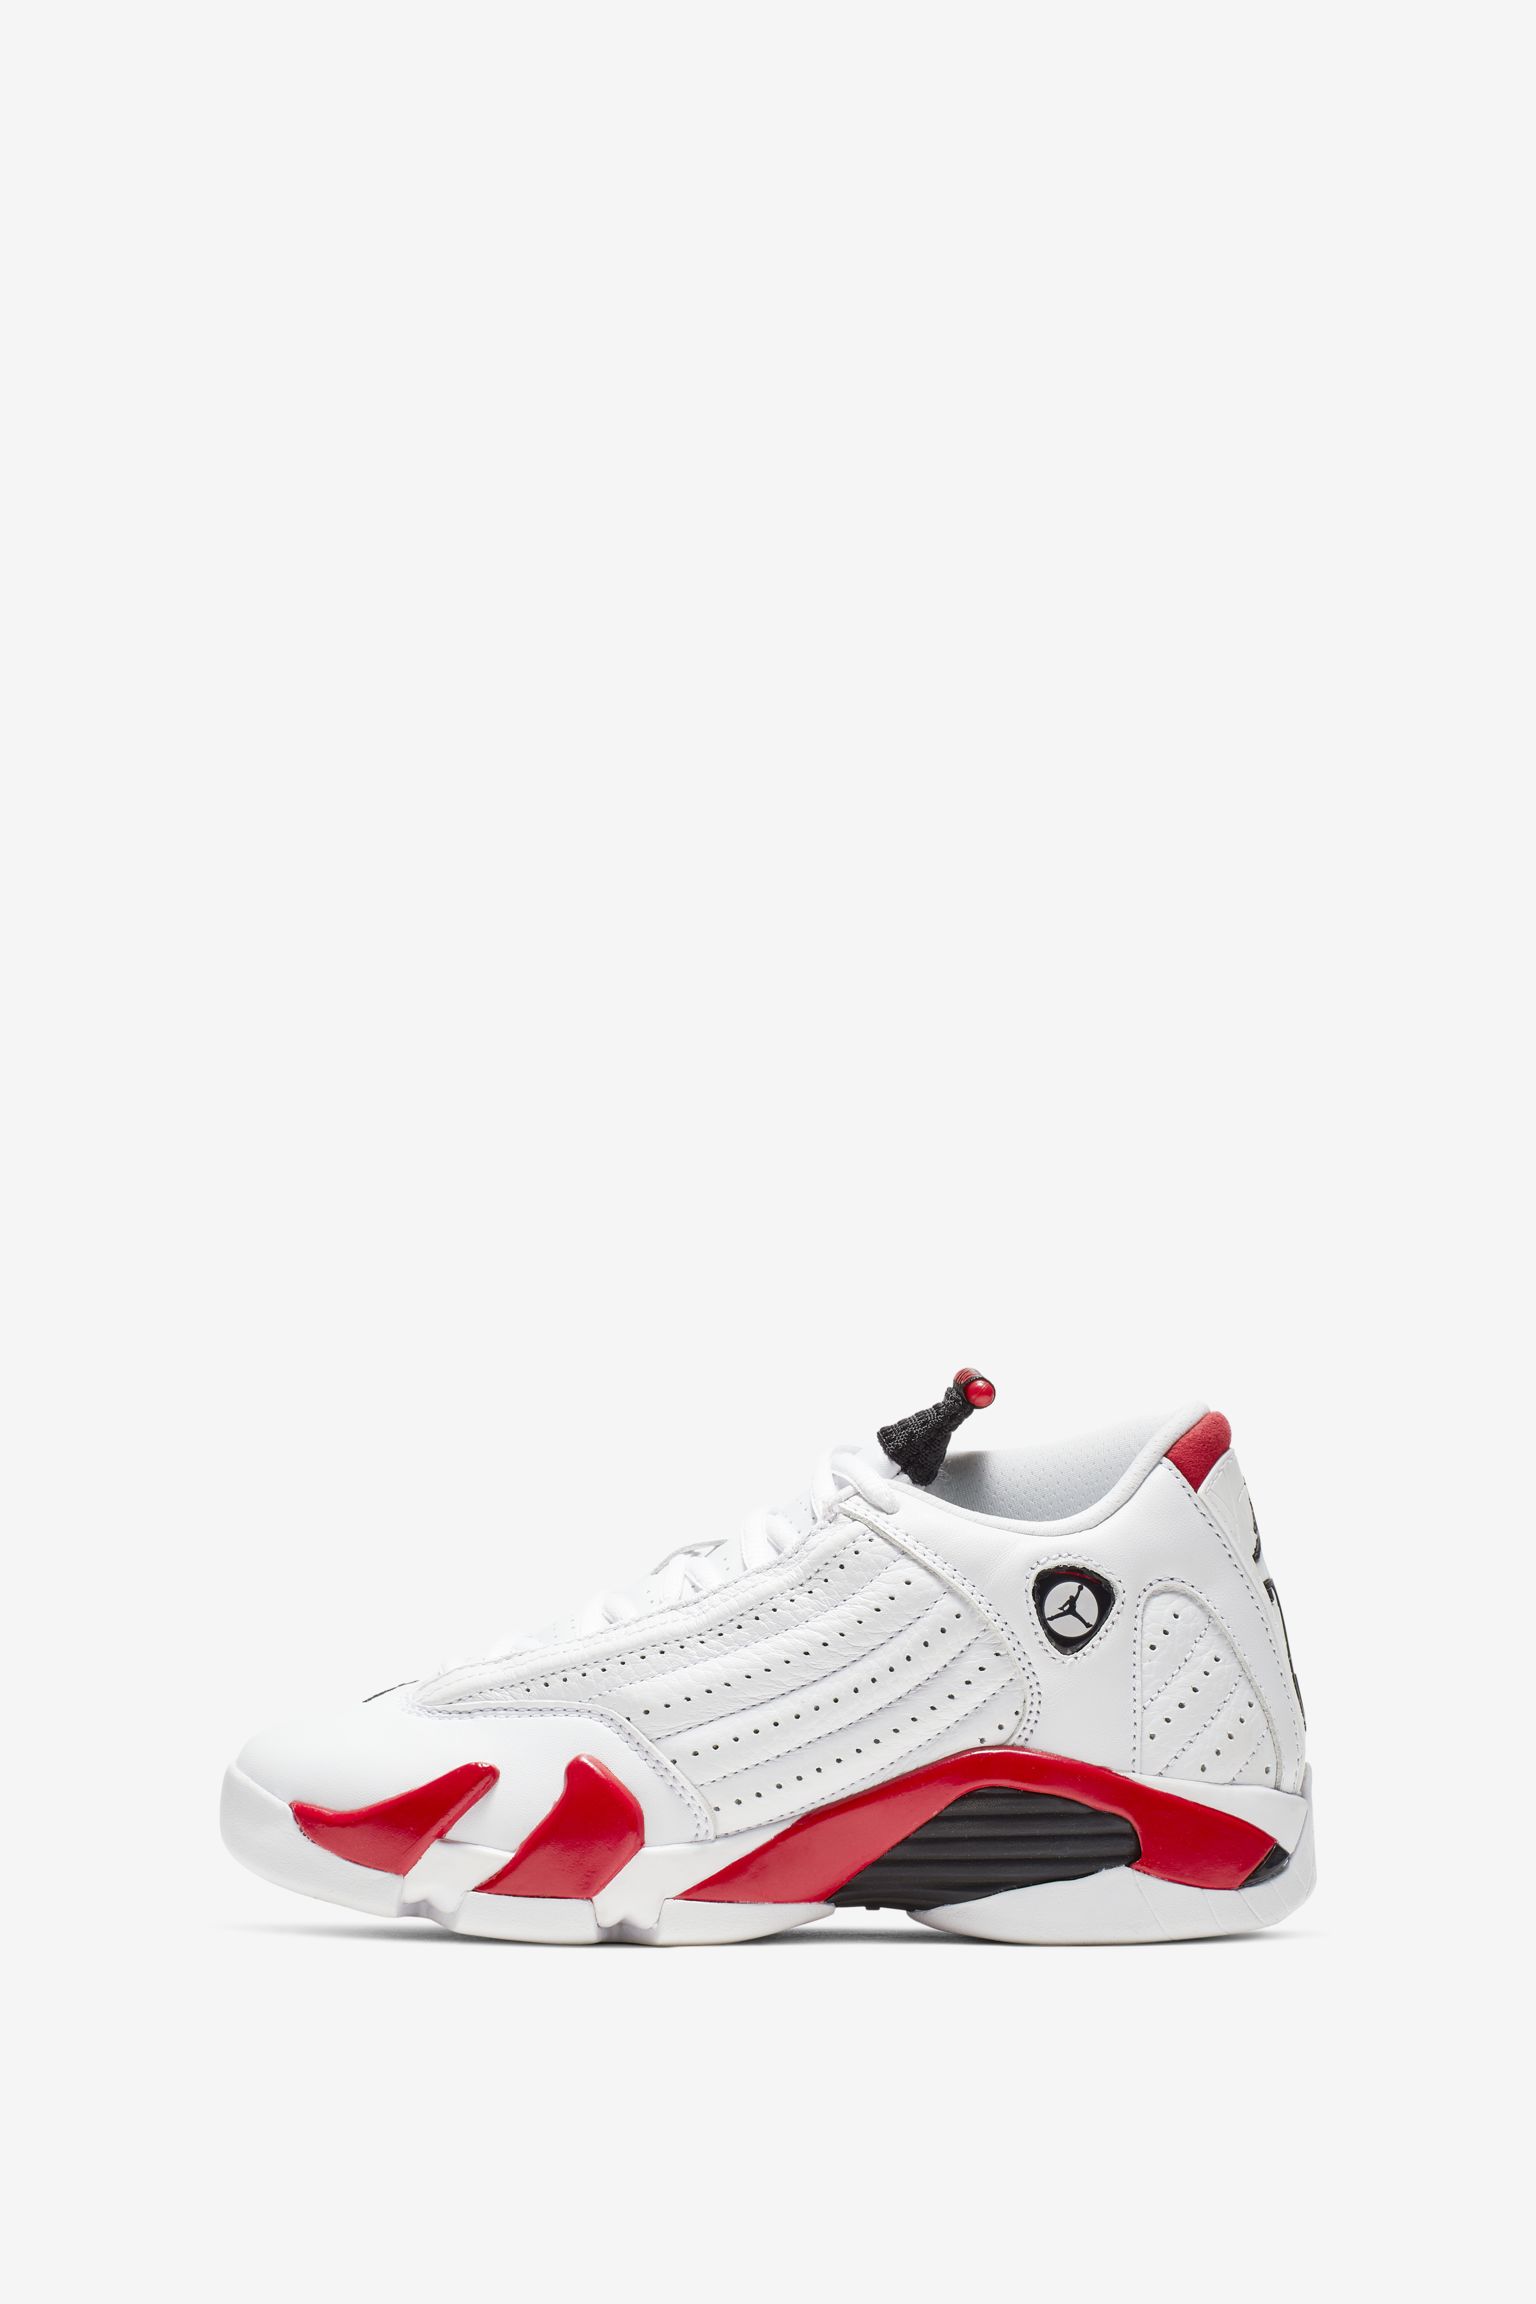 jordan 14 white and red